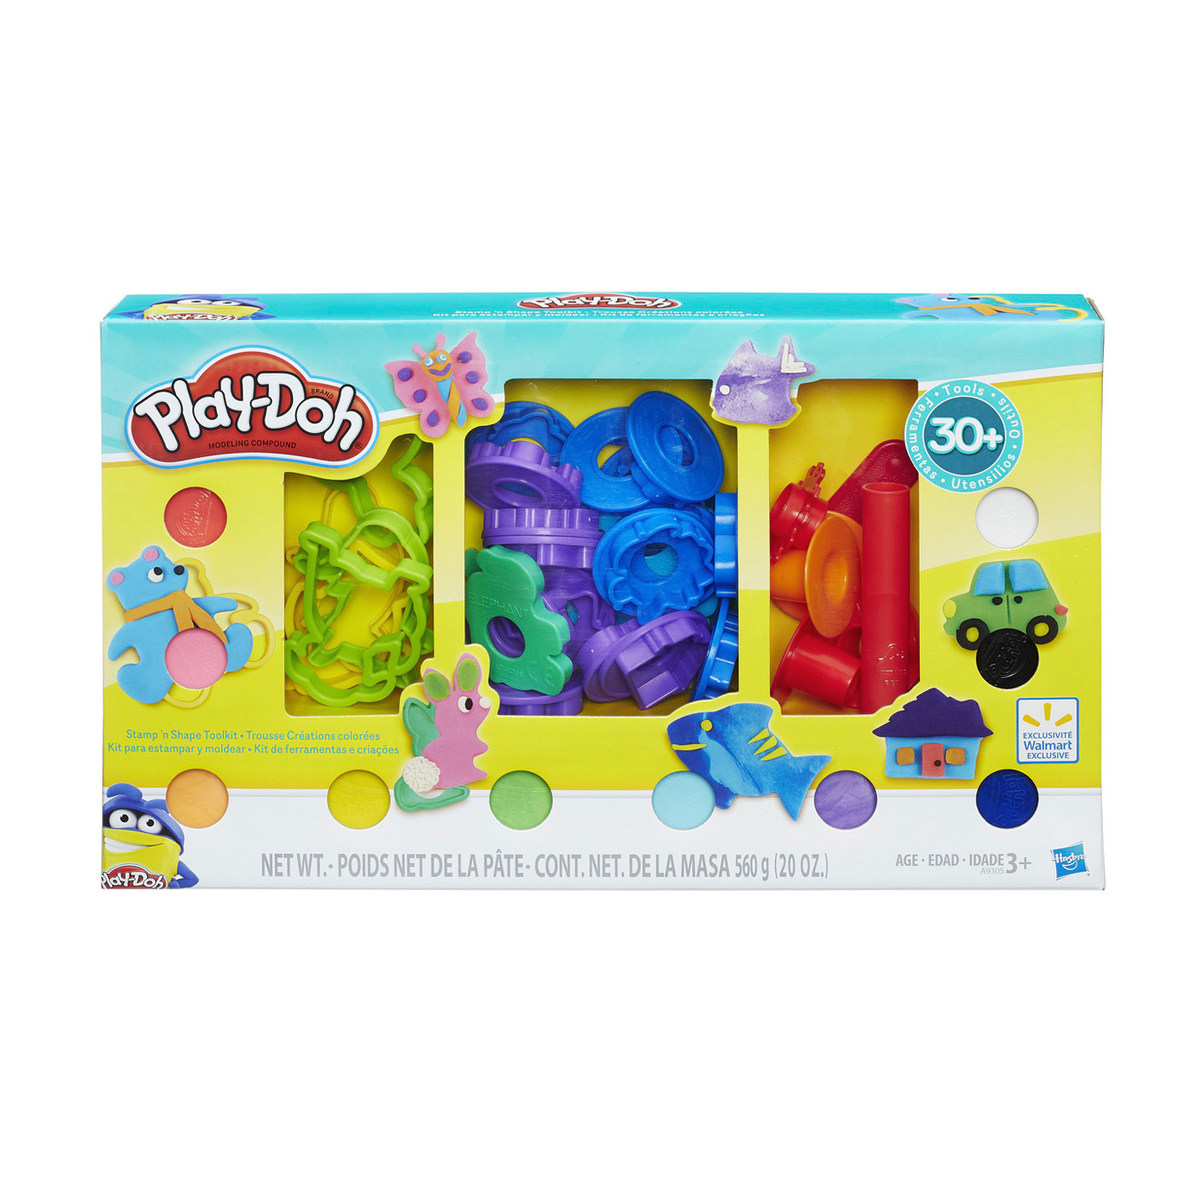 Play-Doh Stamp 'n Shape Toolkit